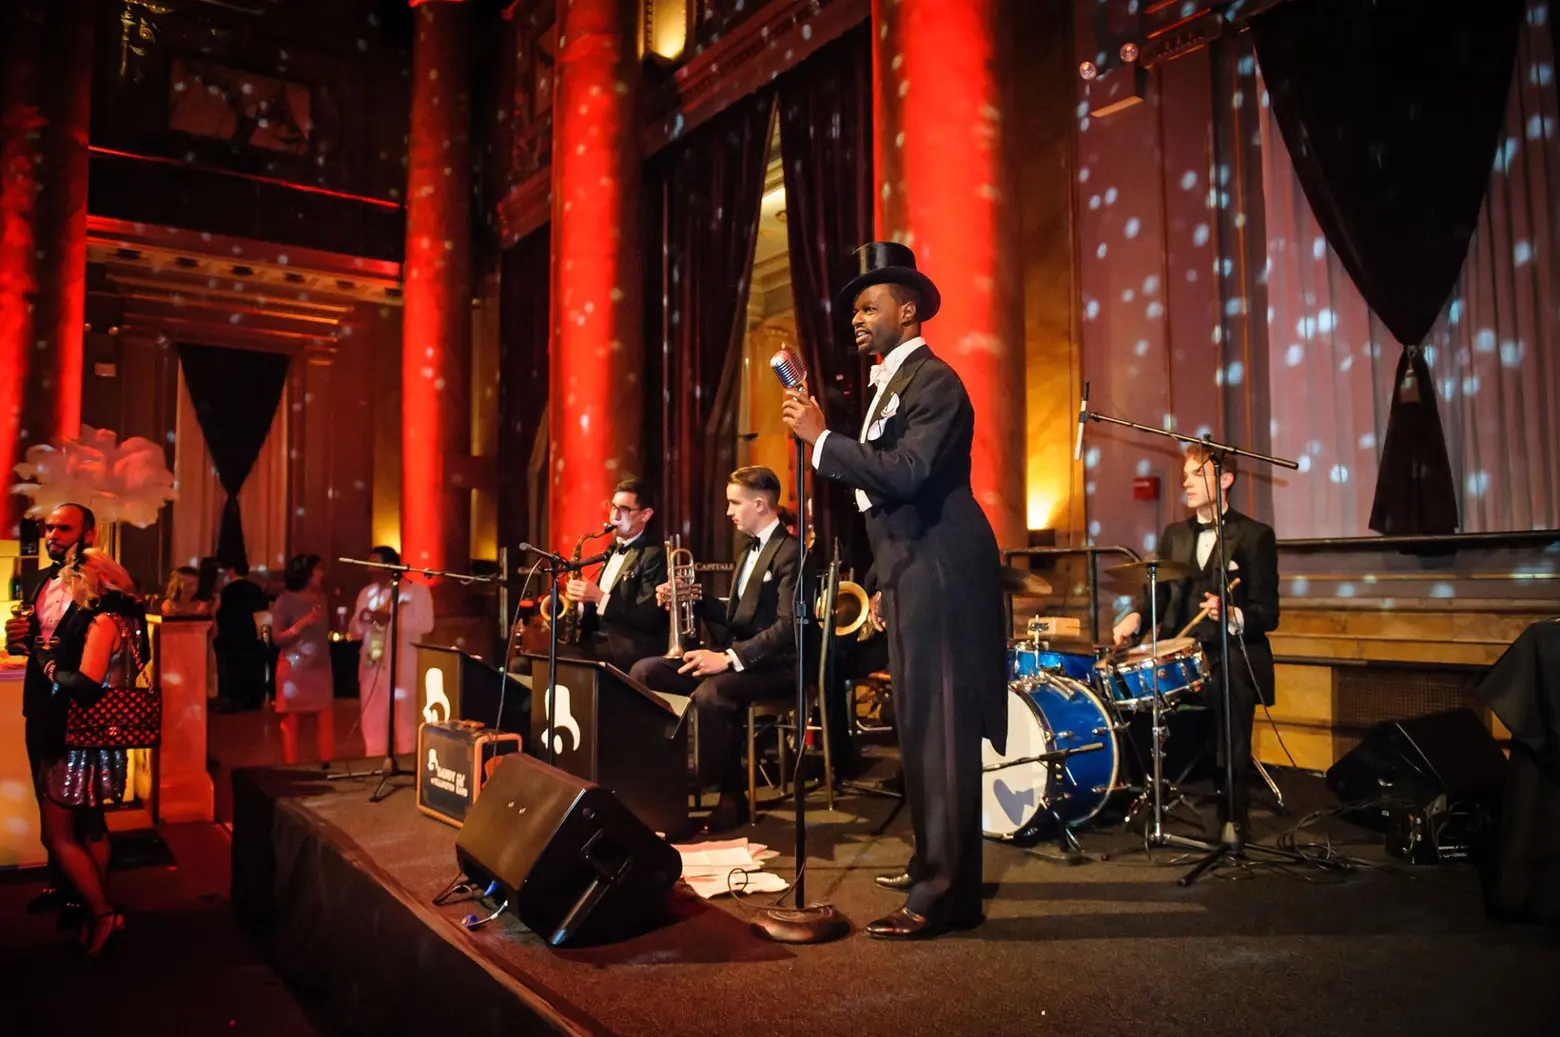 New-York Historical Society hosting an after-hours ‘Roaring 20s’ party this weekend